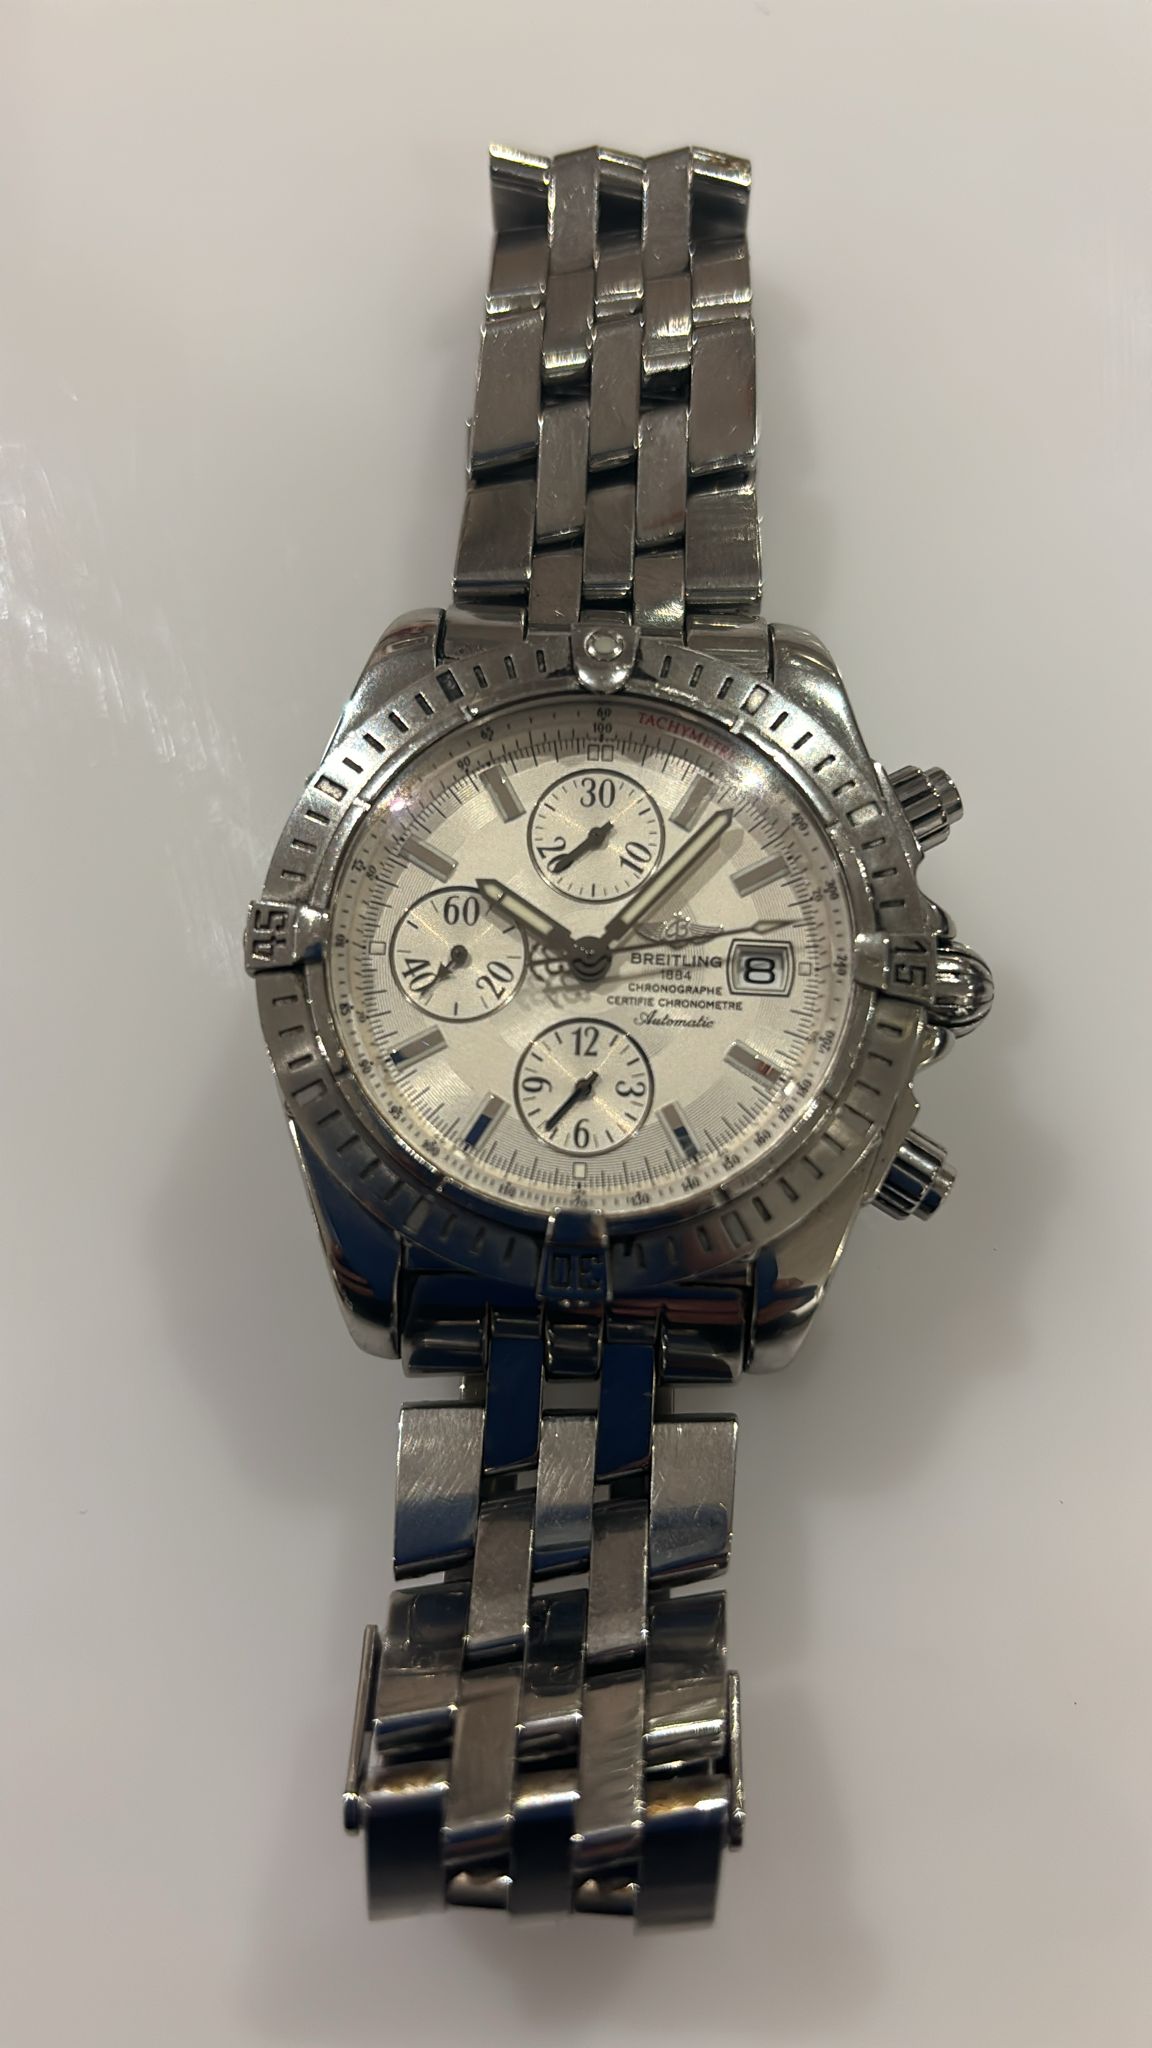 Breitling Chronomat Evolution A13356 Watch - Image 2 of 12